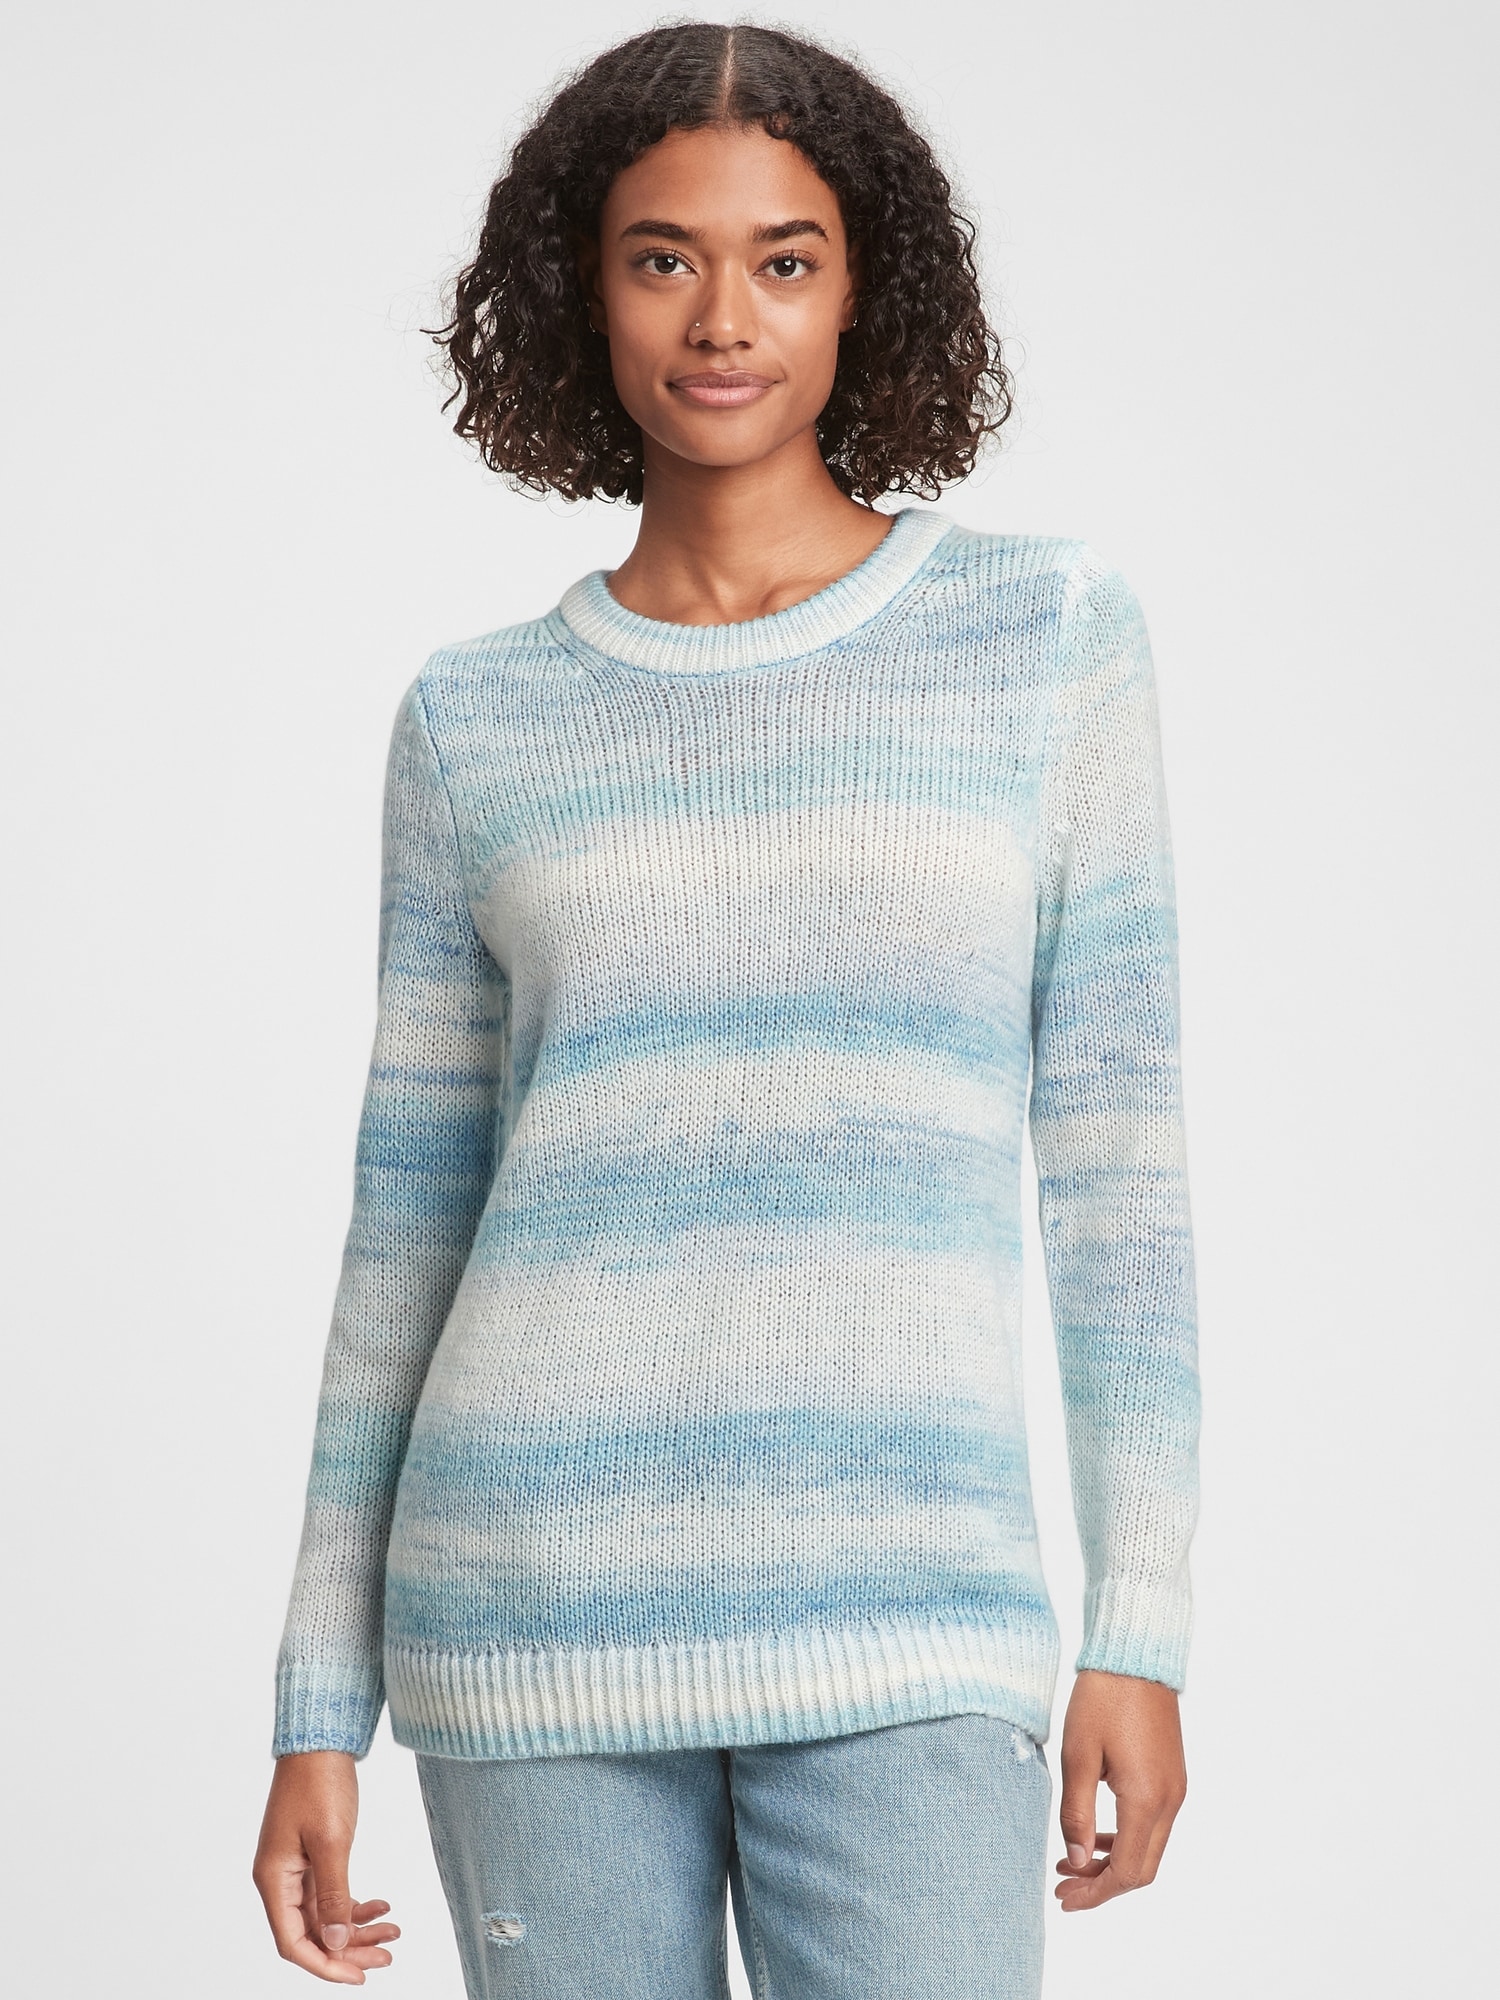 Forever Cozy Tunic Sweater | Gap Factory